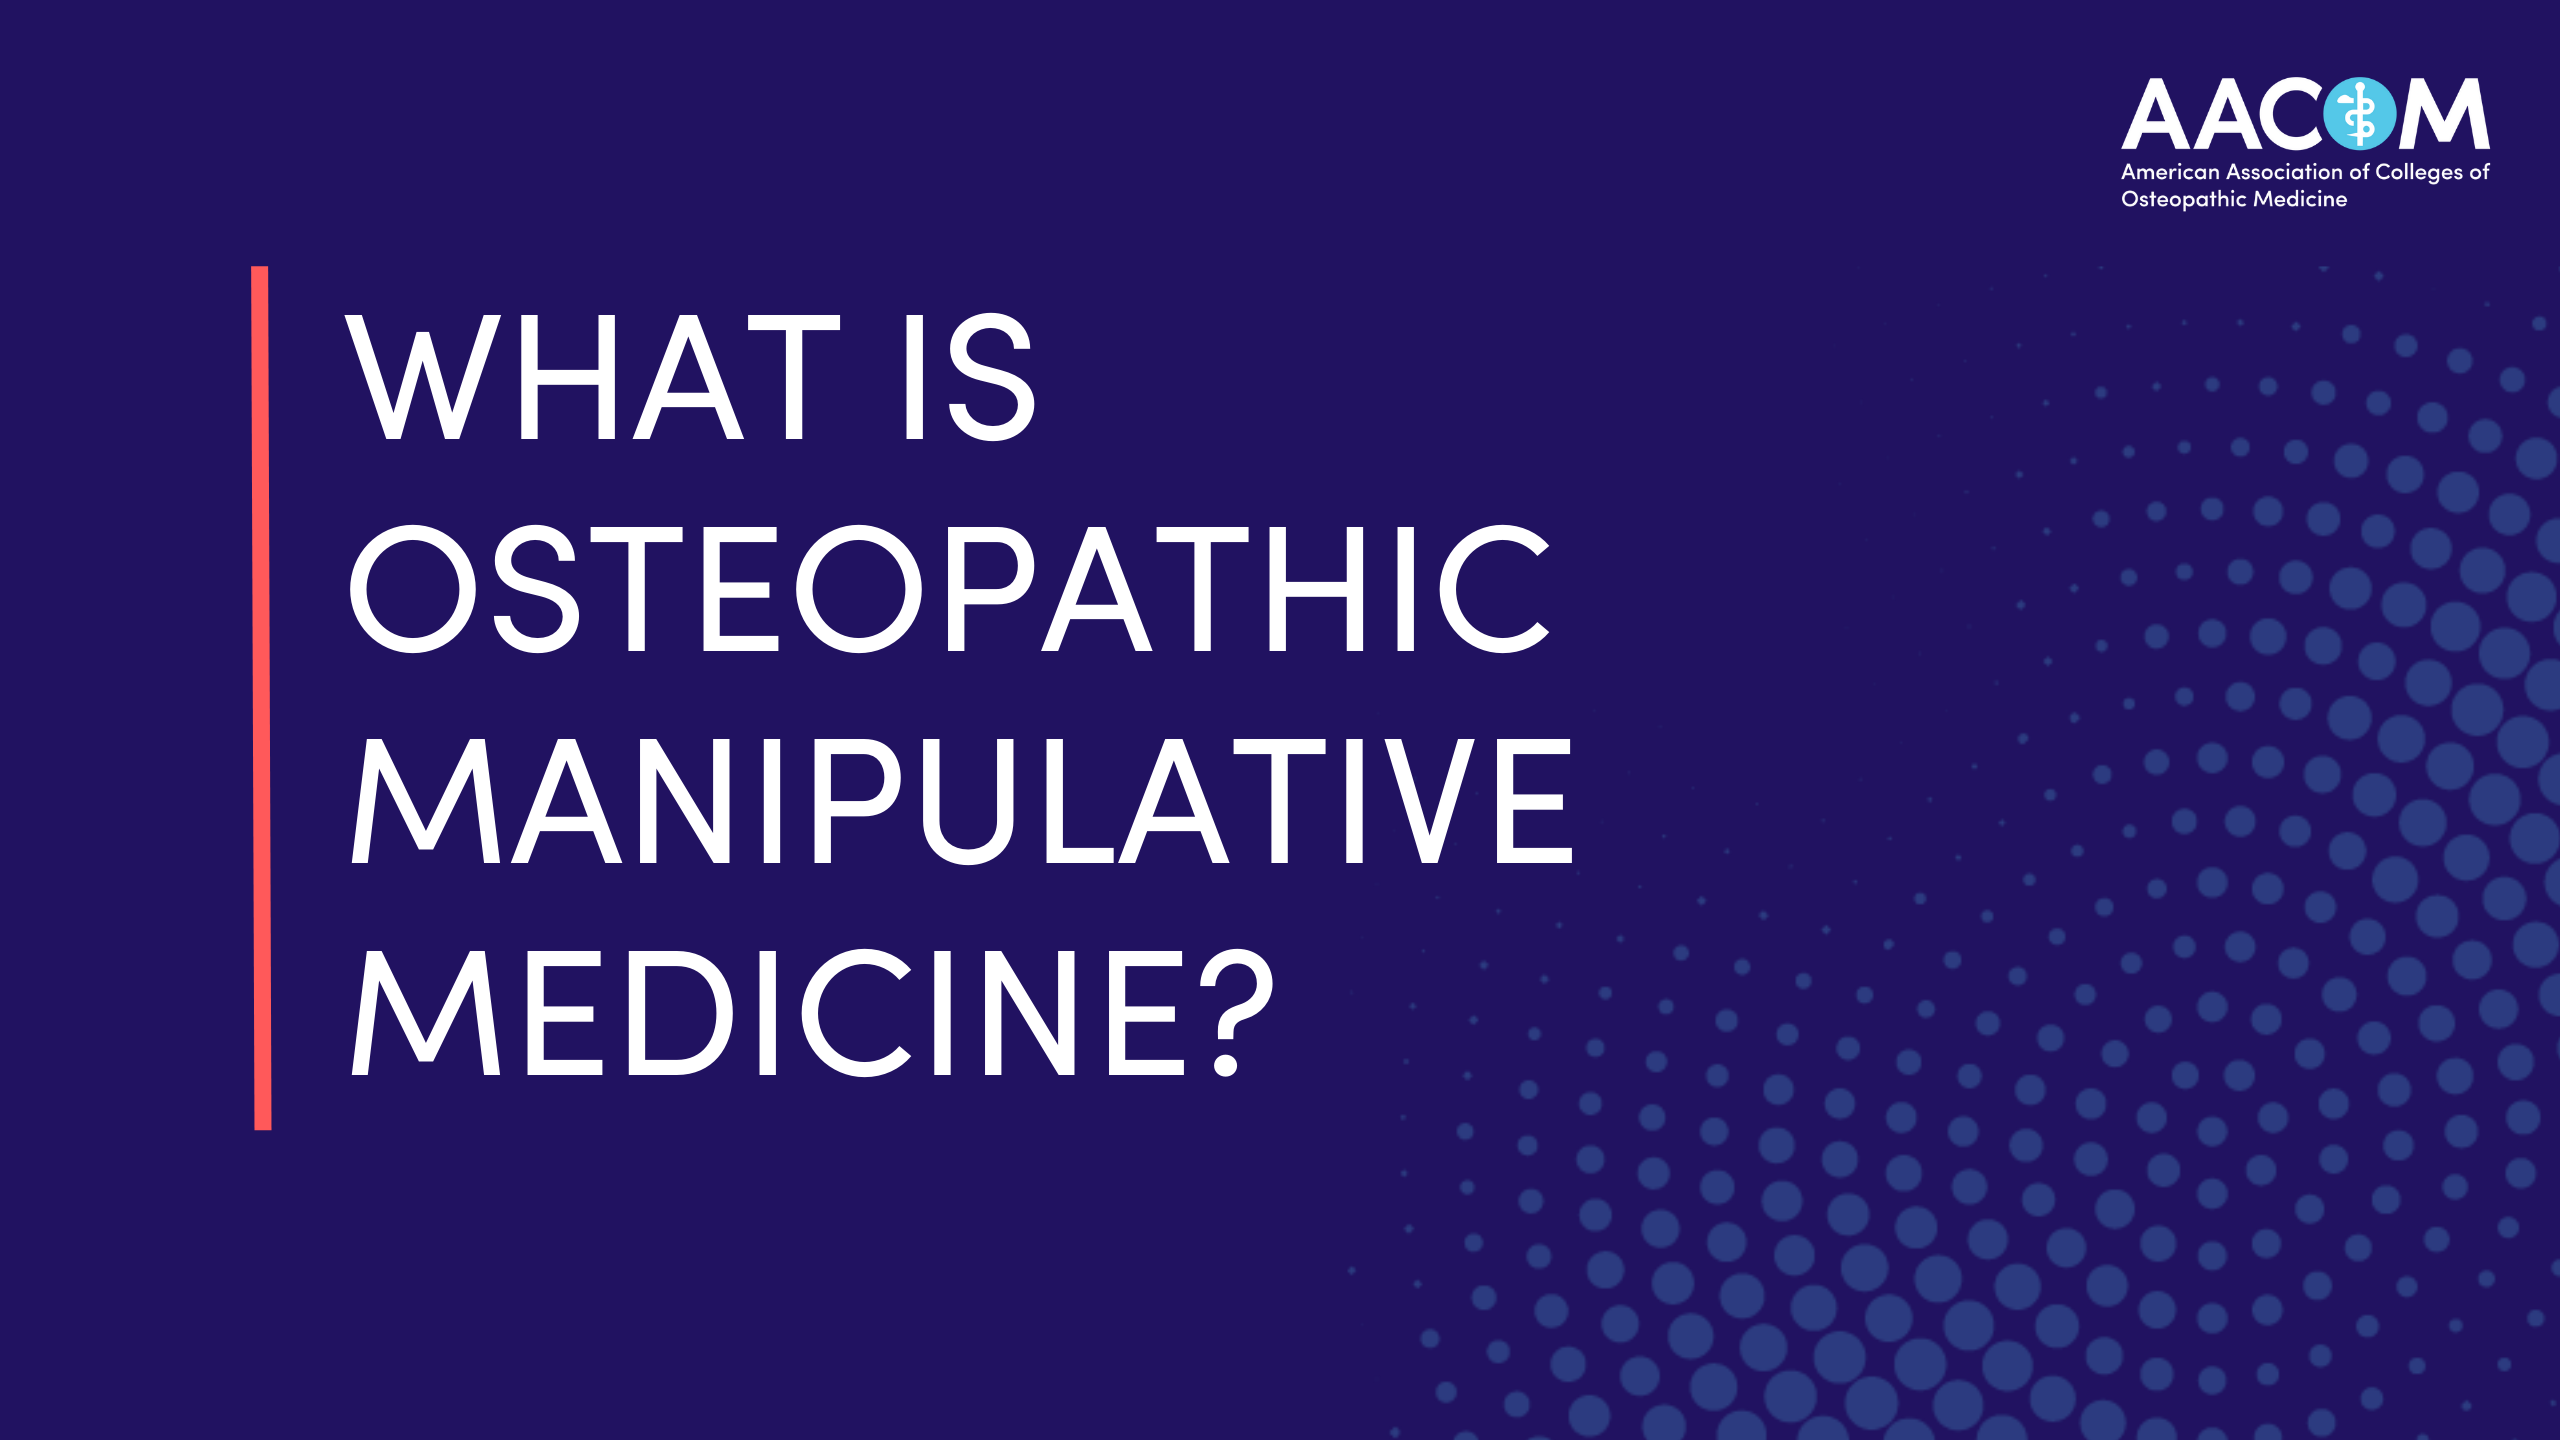 What is Osteopathic Manipulative Medicine (OMM)